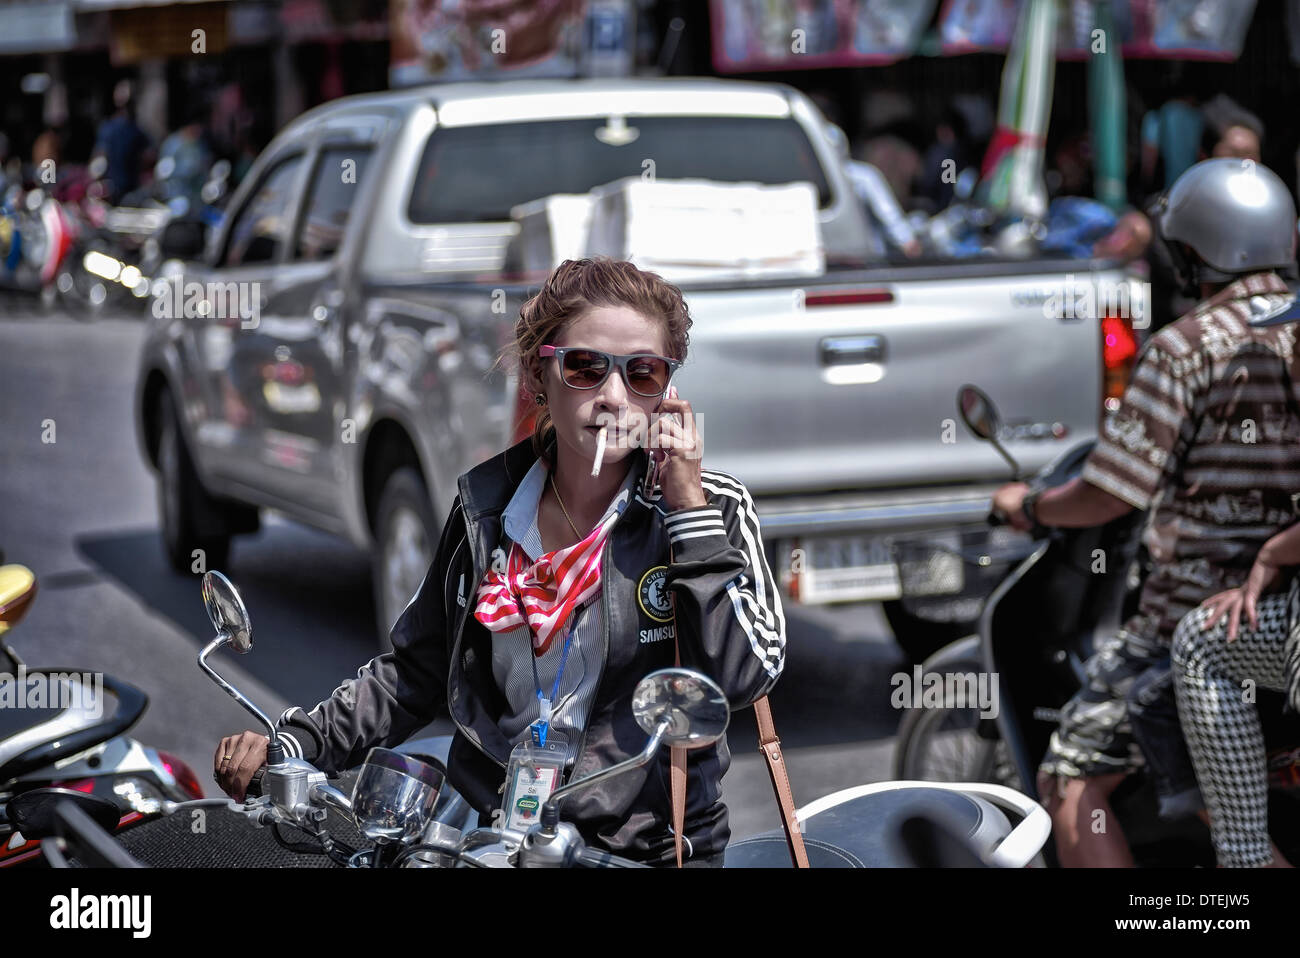 Woman smoking a cigarette and using a mobile phone whilst preparing to ride her motorcycle. Thailand S. E. Asia Stock Photo